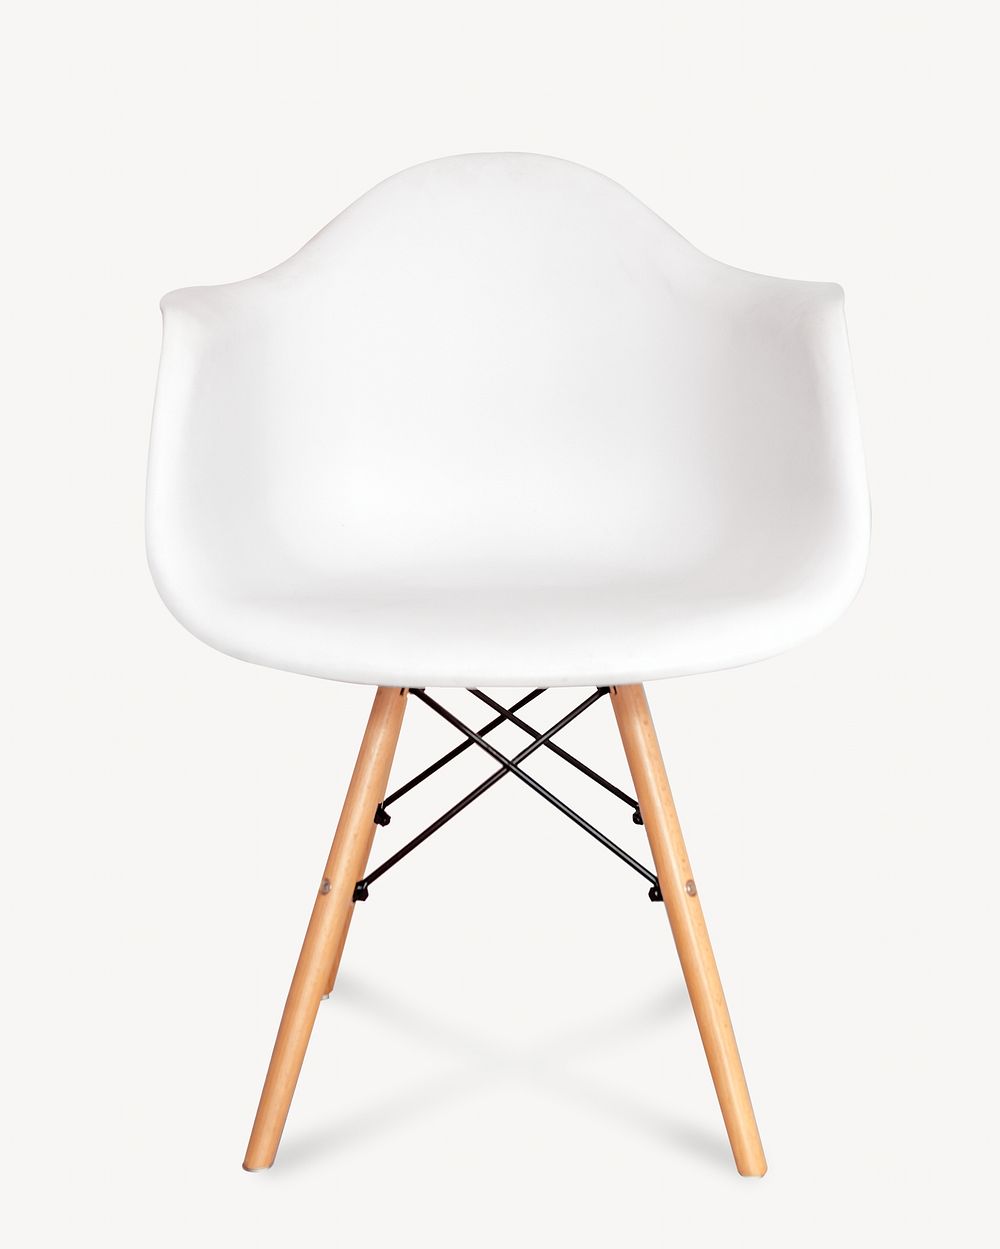 White chair, minimal isolated design